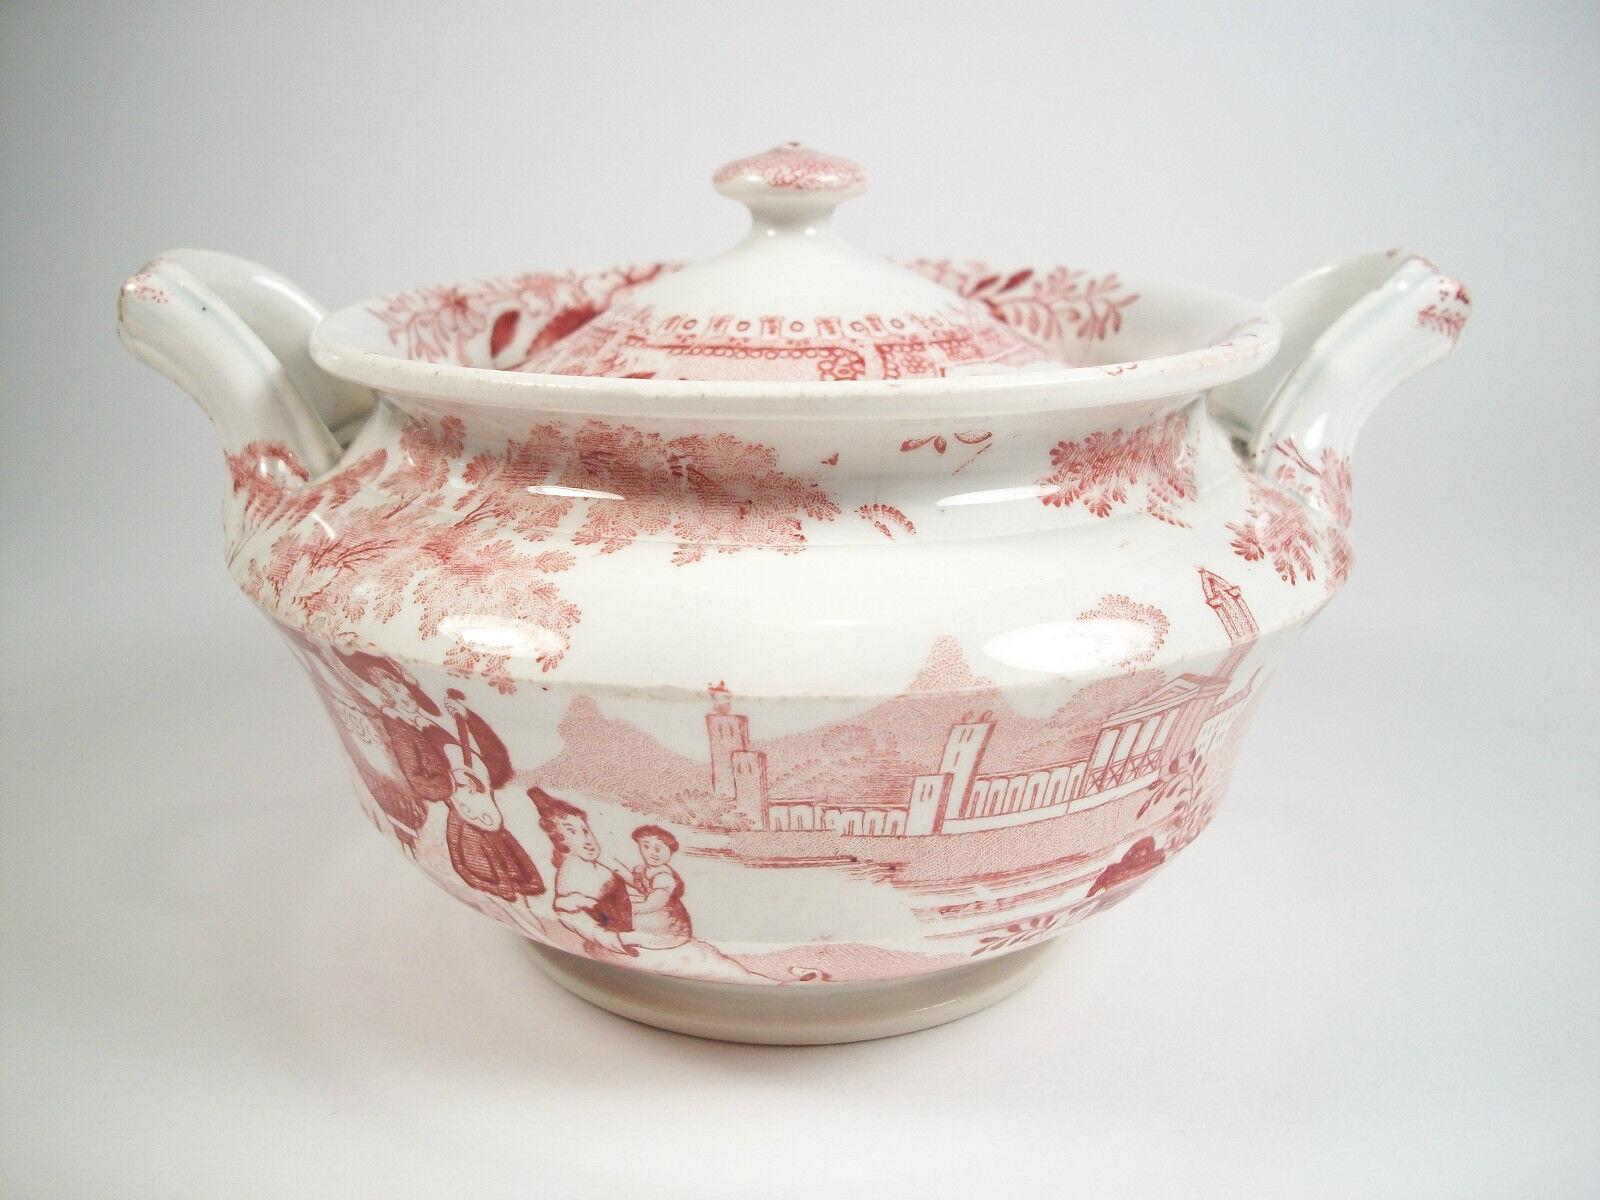 DAWSON'S - PHILAMMON - Antique red transferware sugar bowl with lid - quatrefoil and transfer mark on the base - United Kingdom - early 19th century.

Good antique condition - rim chips to the lid (two largest shown in detail photos) - stains to the